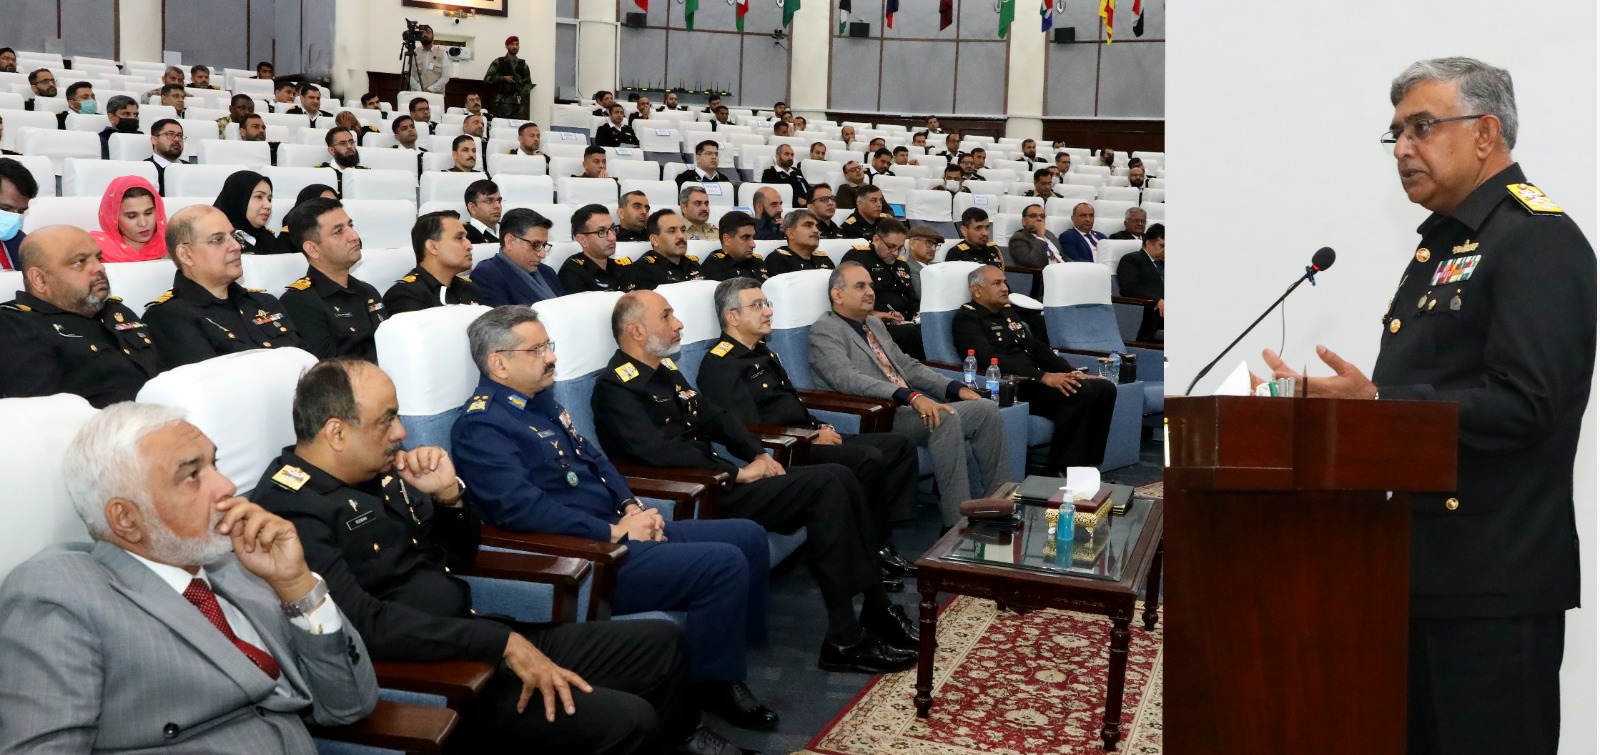 ROBUST NATIONAL MARITIME SECTOR PROVIDES FOUNDATION FOR SUSTAINABLE ECONOMIC FUTURE – CHIEF OF THE NAVAL STAFF